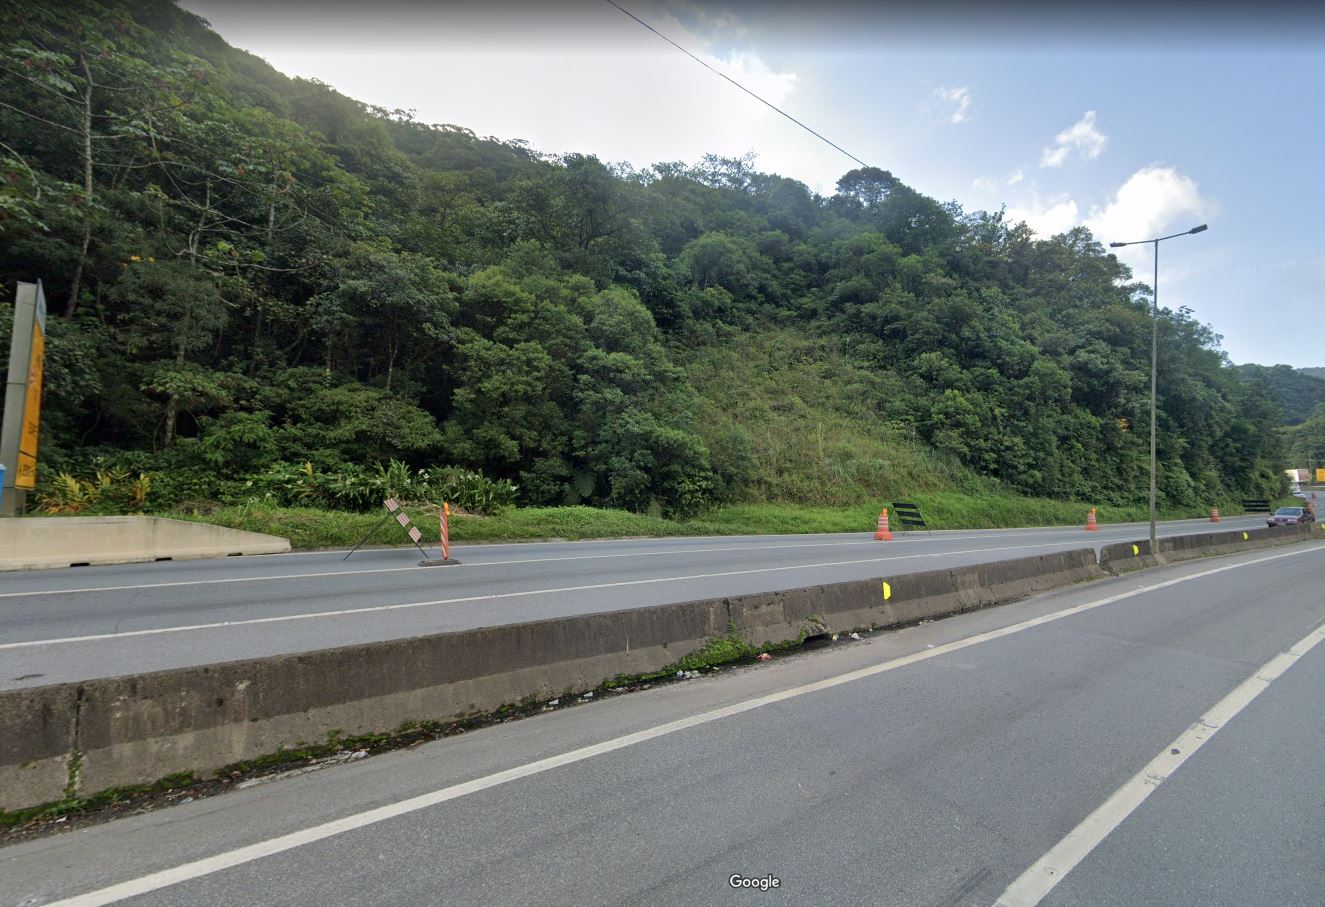 Google Street View image of the likely location of the BR-376 landslide in Brazil.